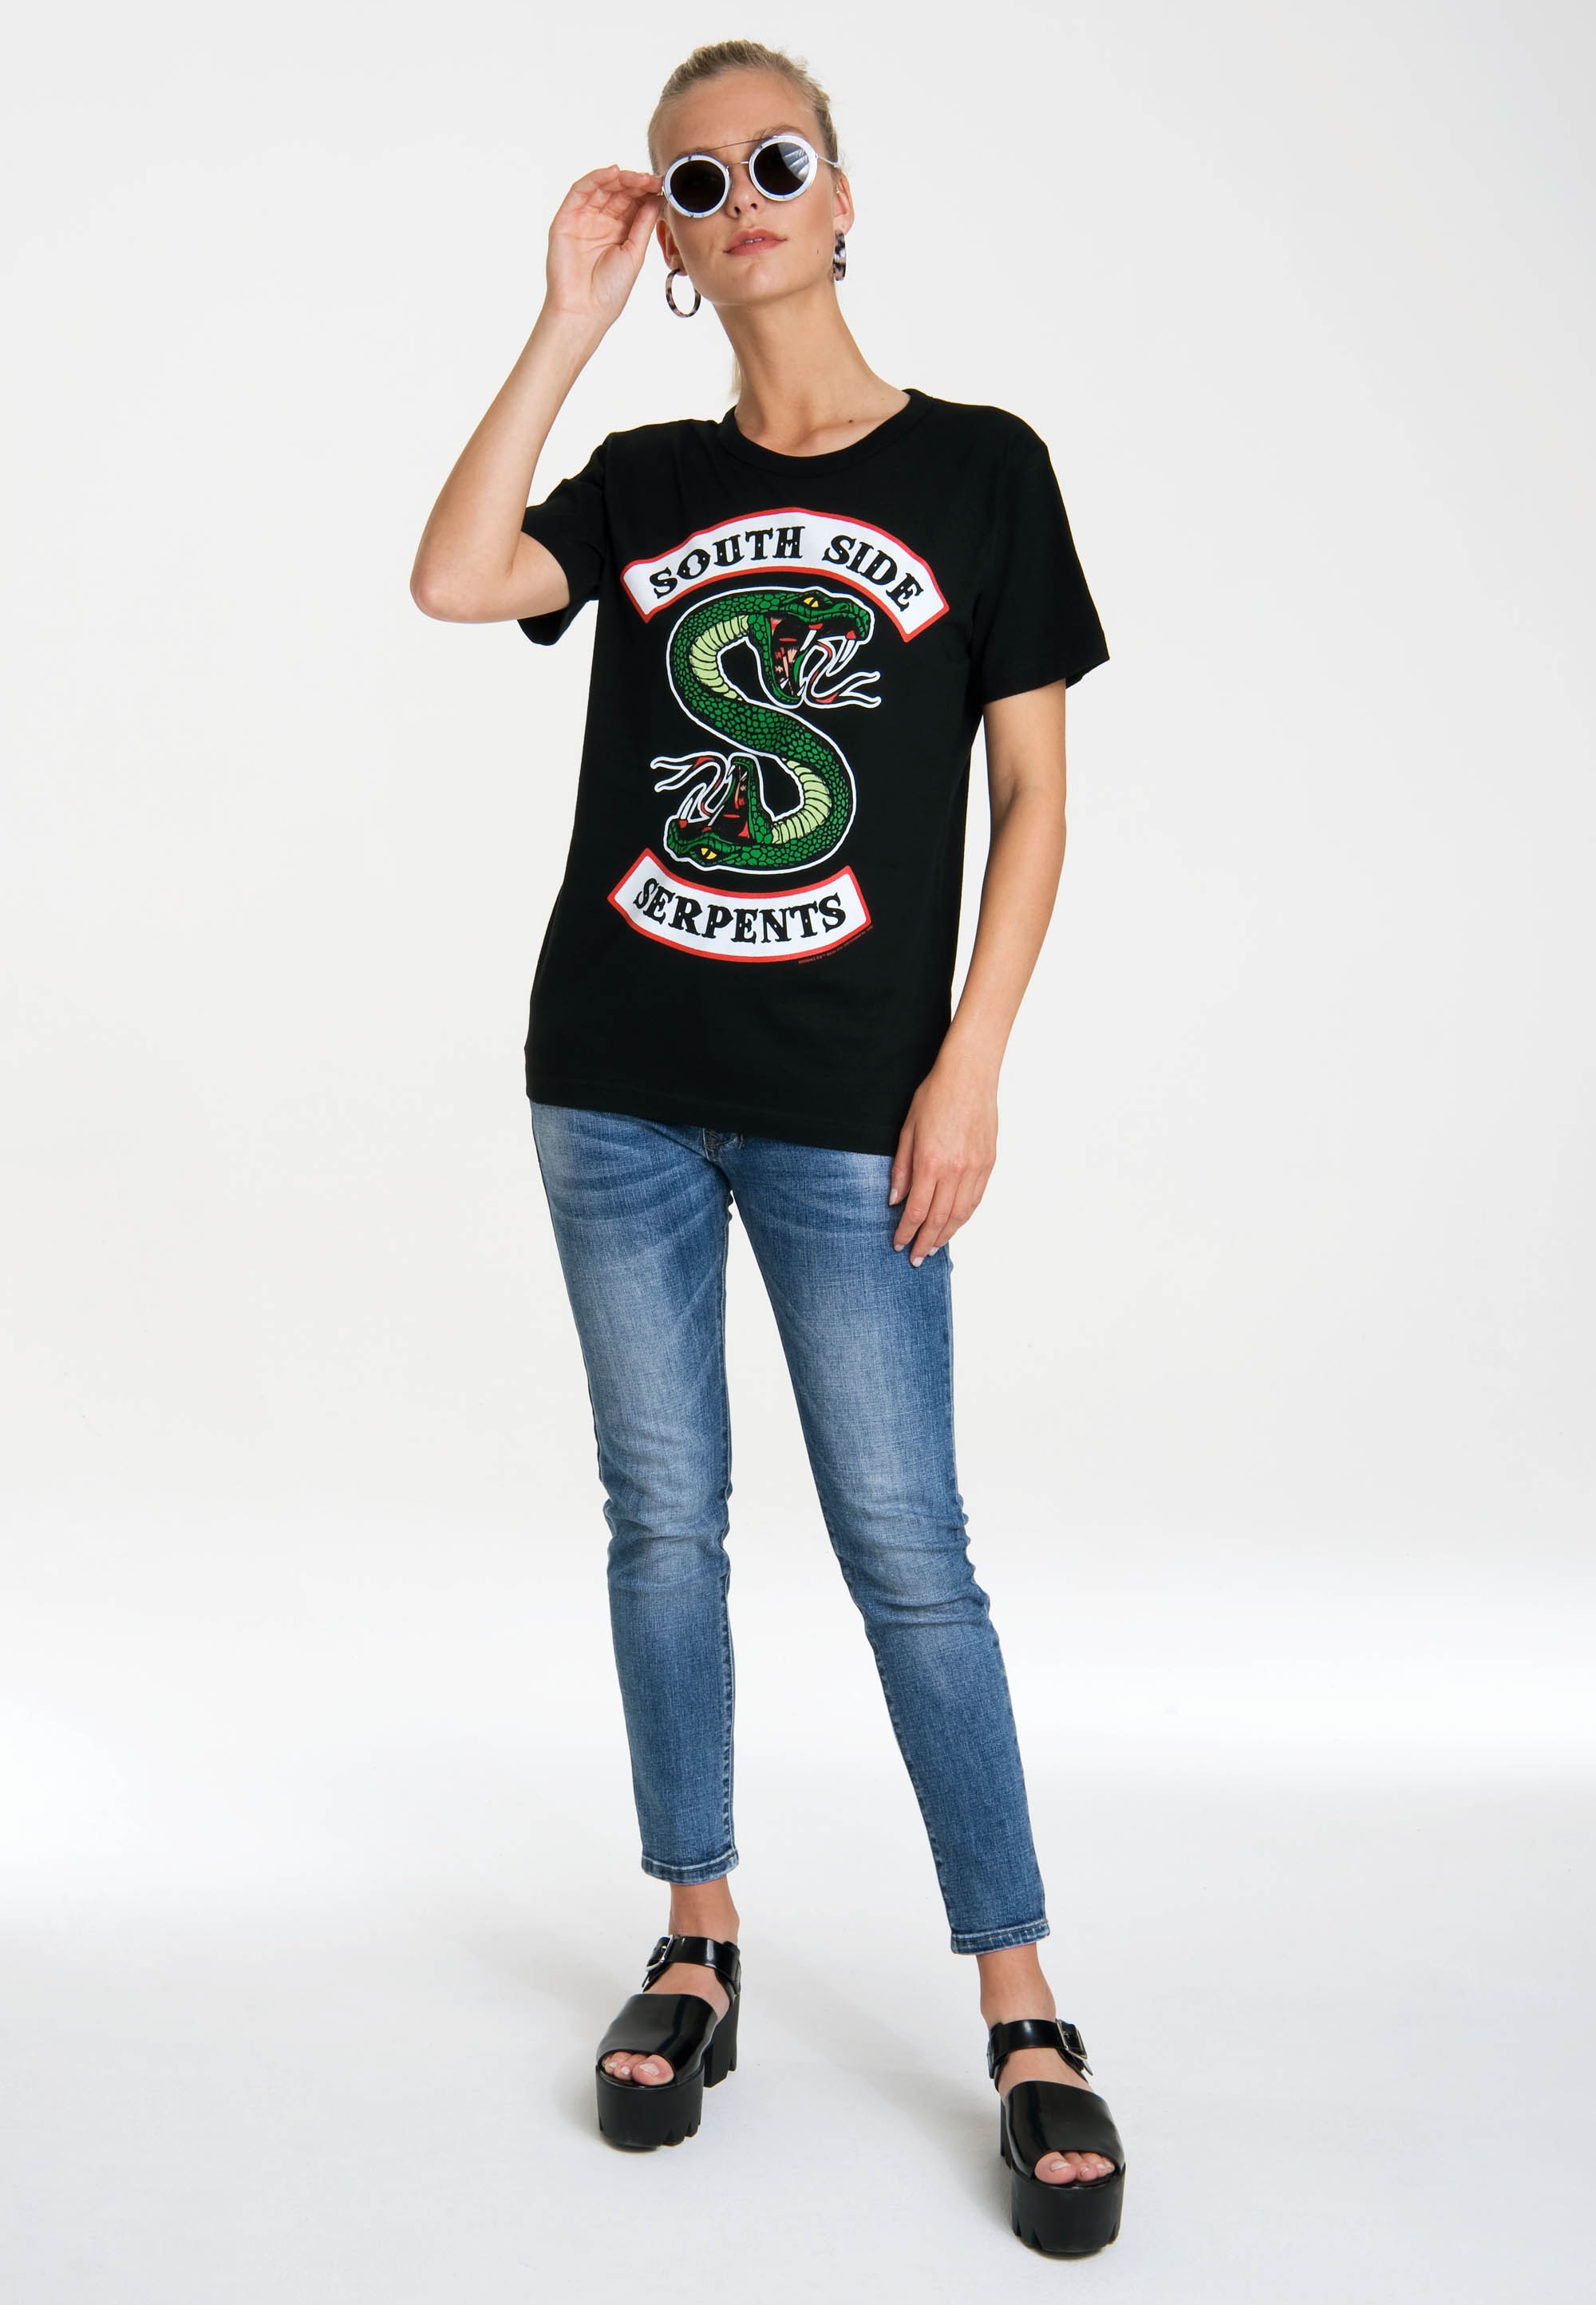 T-Shirt »South Side Serpents«, mit Riverdale-Frontprint